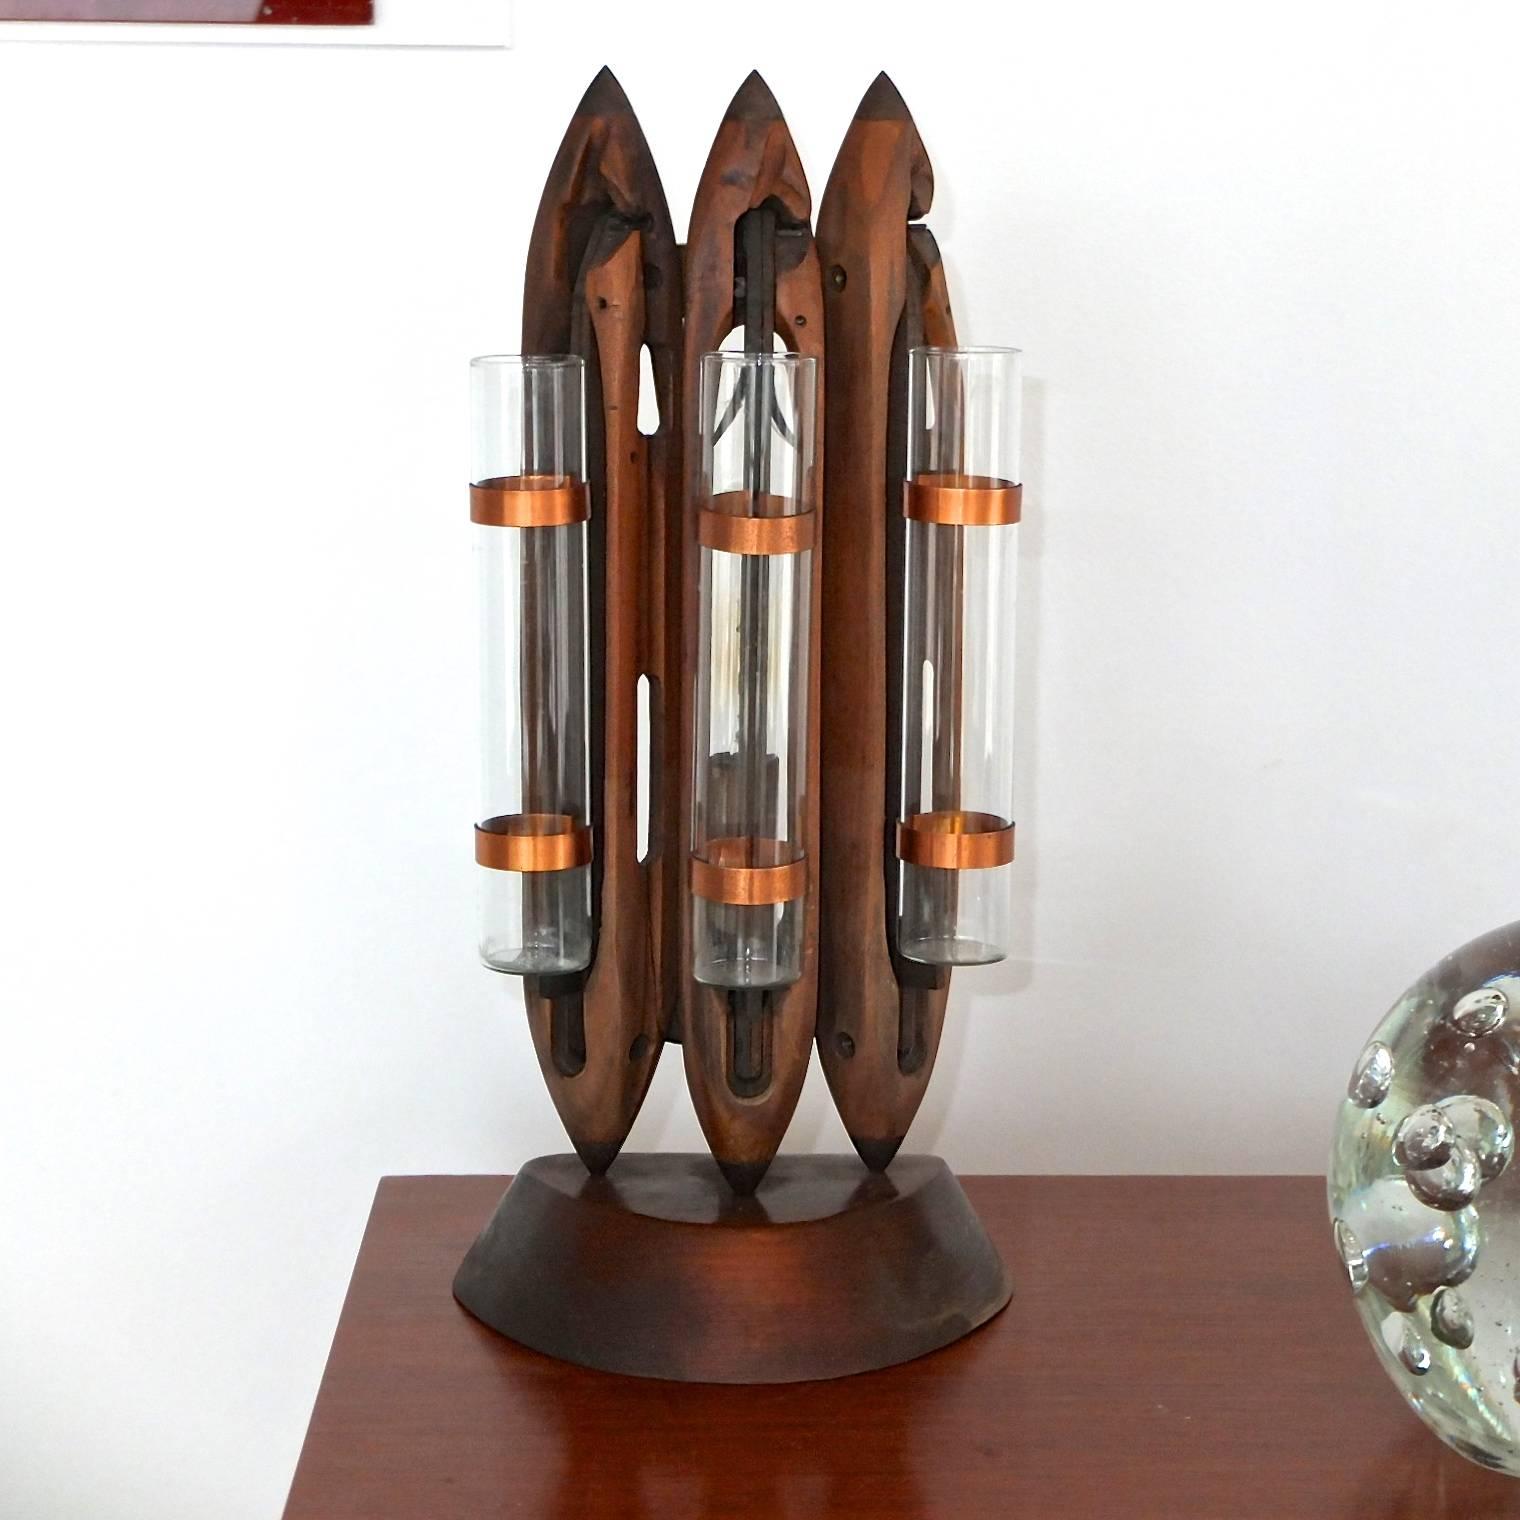 Vintage folk art table lamp made in the mid-20th century from three brass tipped weaving shuttles on a matching wood stand. Affixed to each shuttle by two copper ring clips is a glass tube for use as a bud vase. Behind the middle shuttle is a single